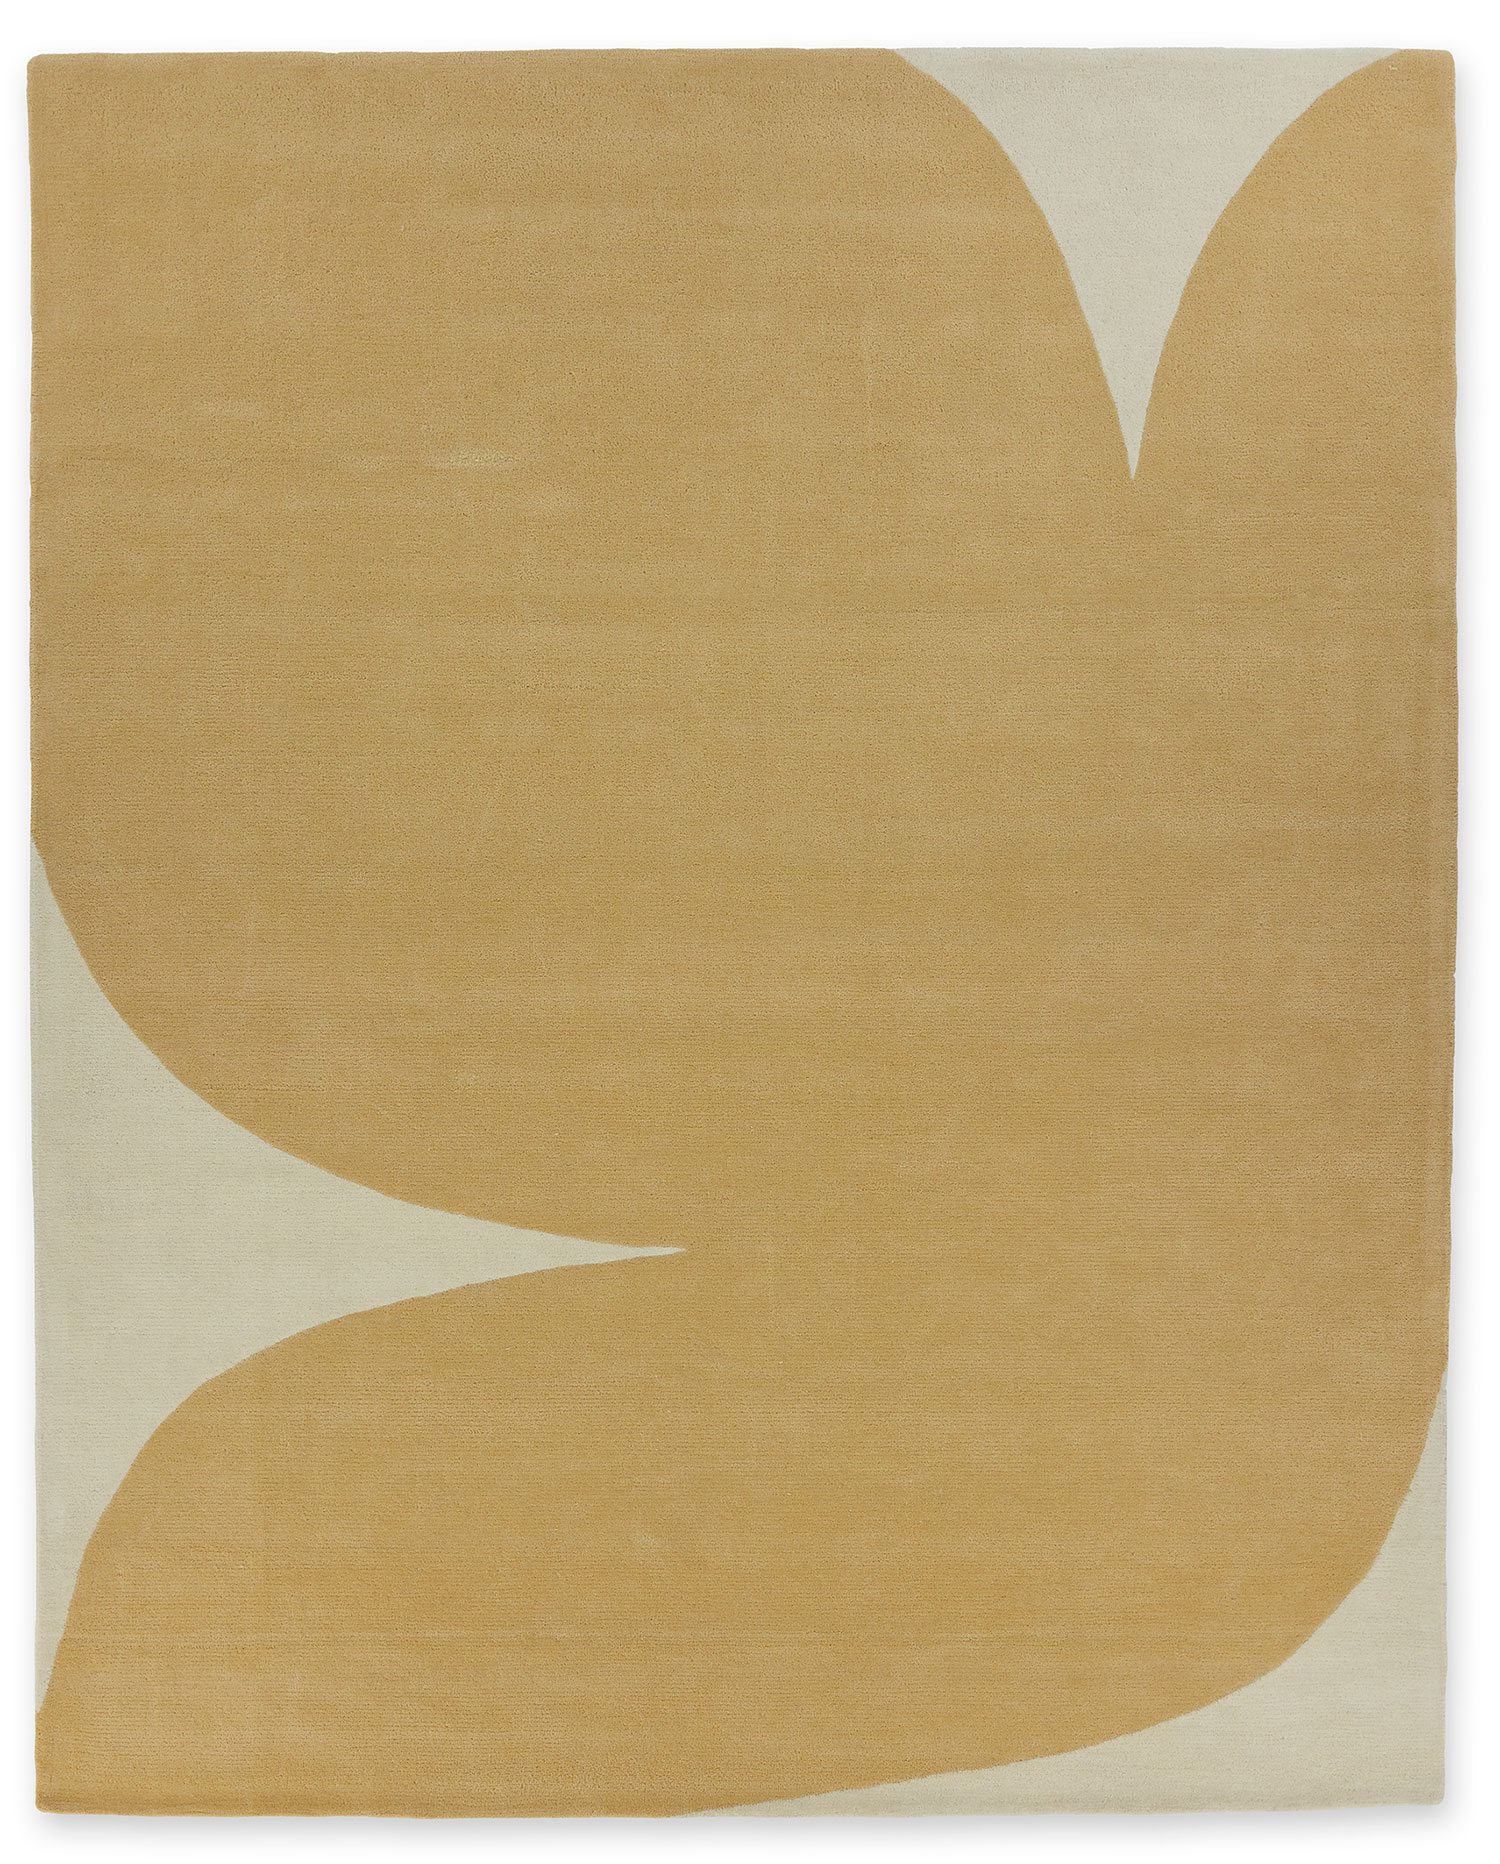 A beige colored, hand tufted area rug called Dove Peace, by Angela Adams